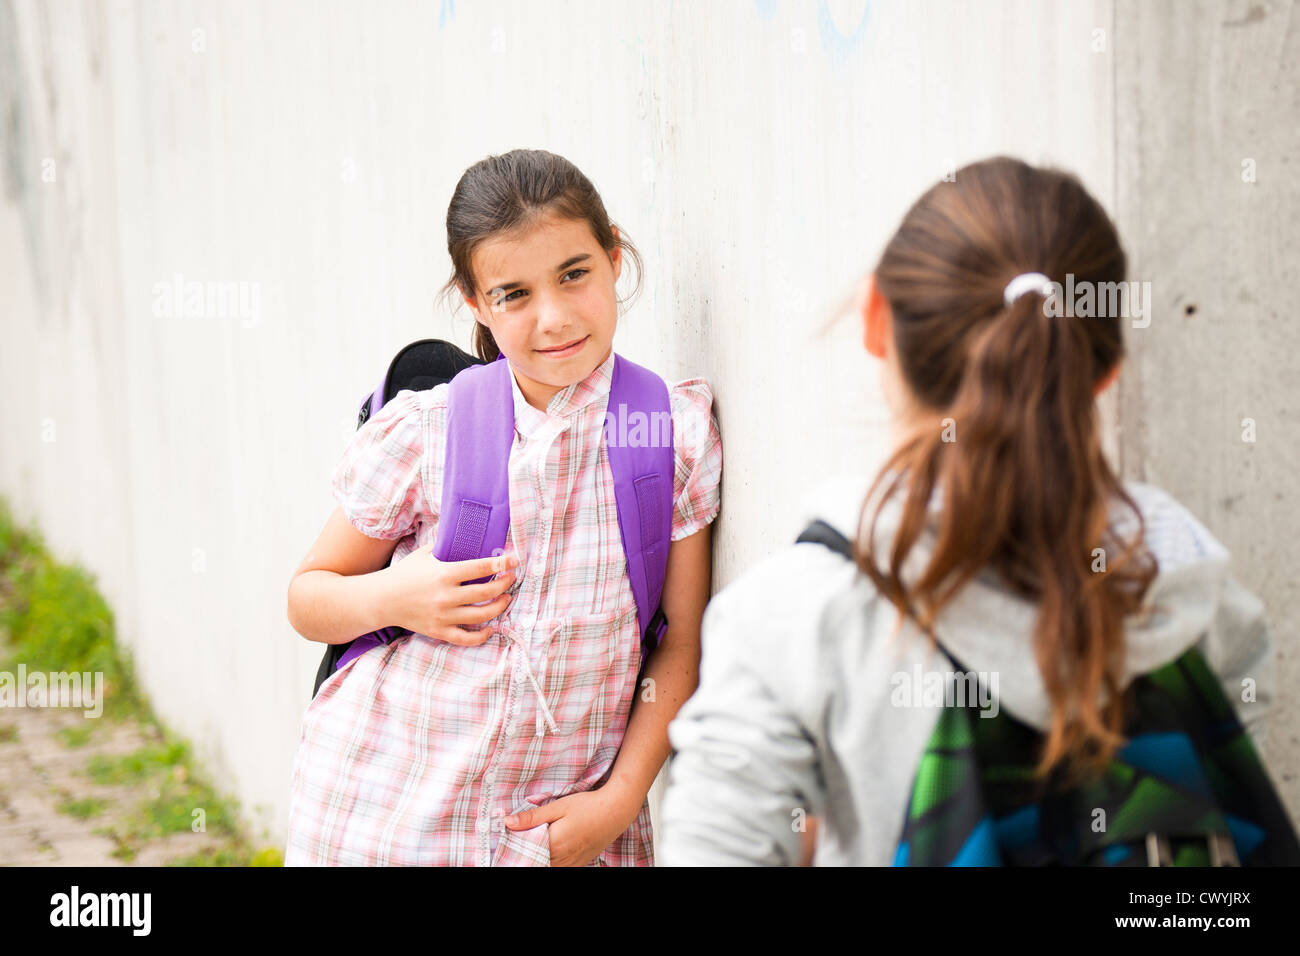 Two girls at concrete wall looking at each other Stock Photo